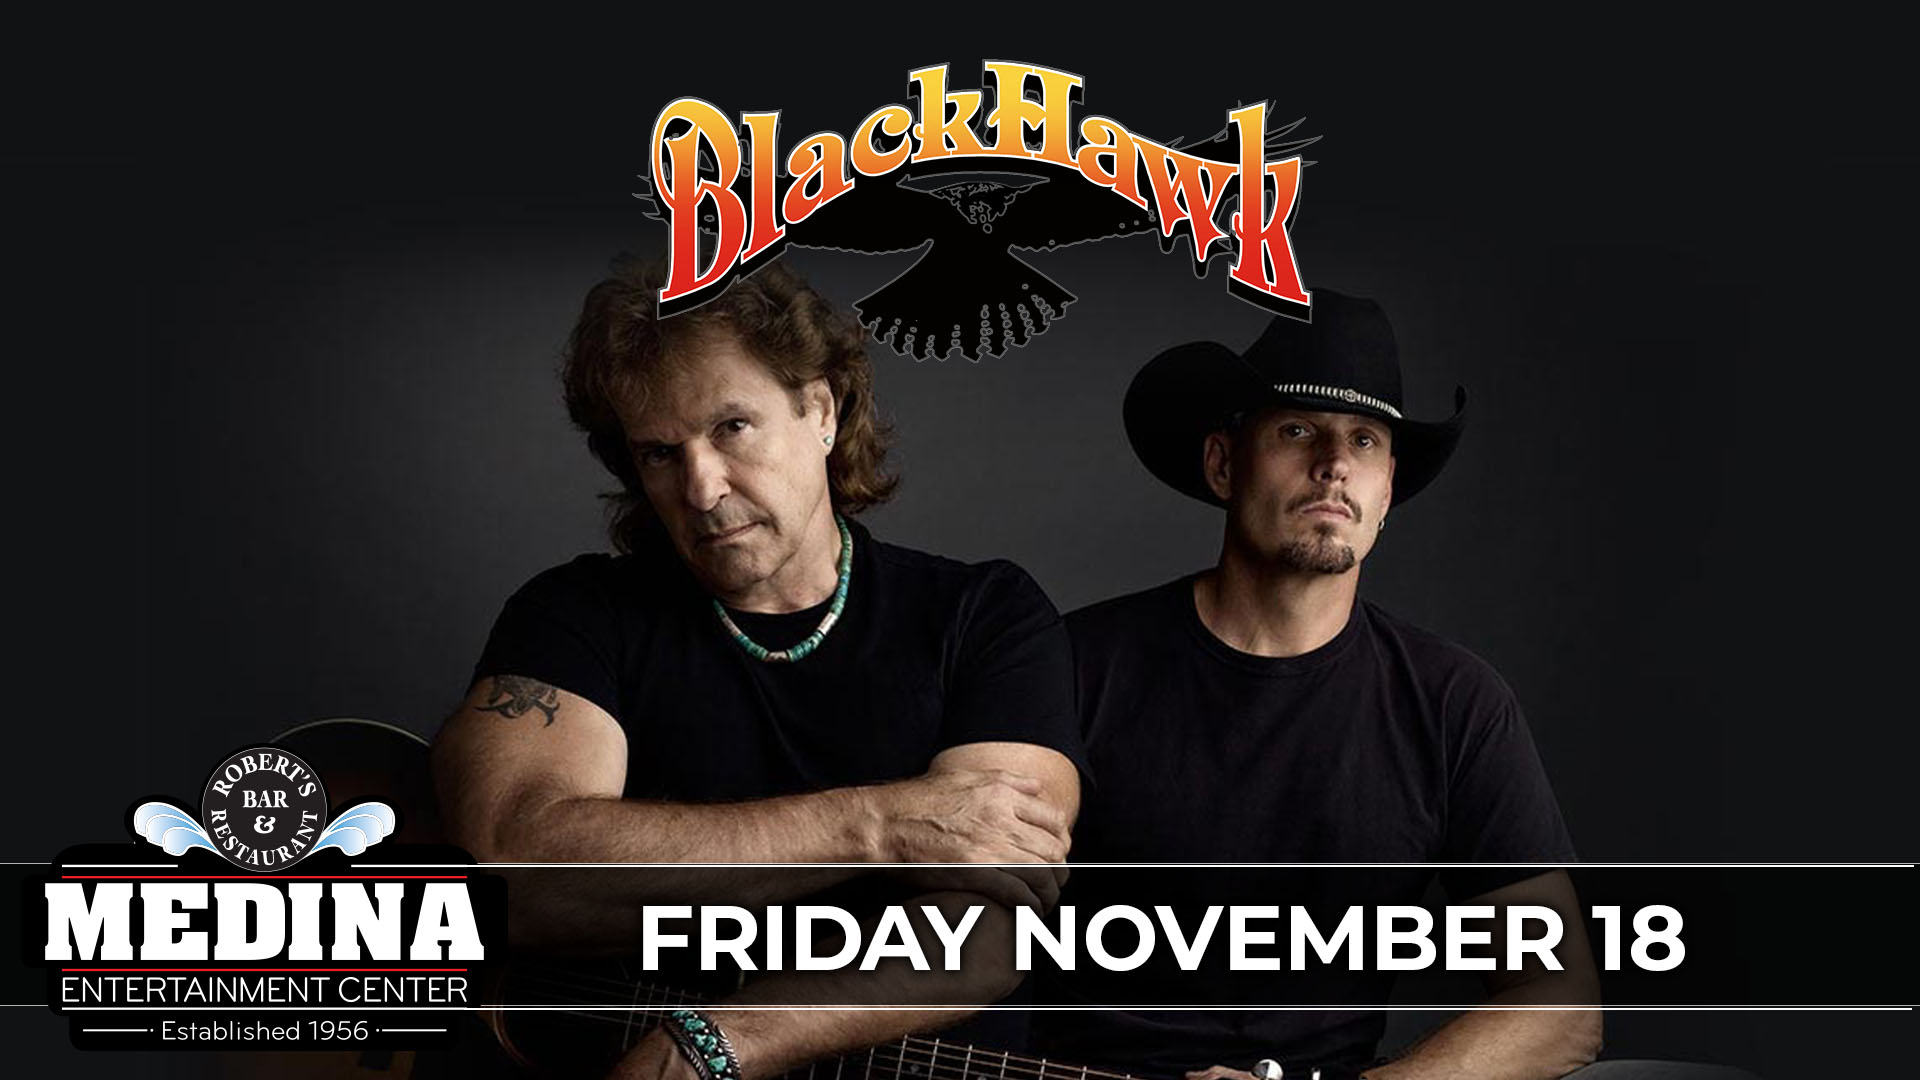 Medina Entertainment Center Friday, November 18th, 2021 Doors: 7:30PM | Music: 8:30PM | 21+ General Seating $32 / Silver Reserved $40/ Gold Reserved $49